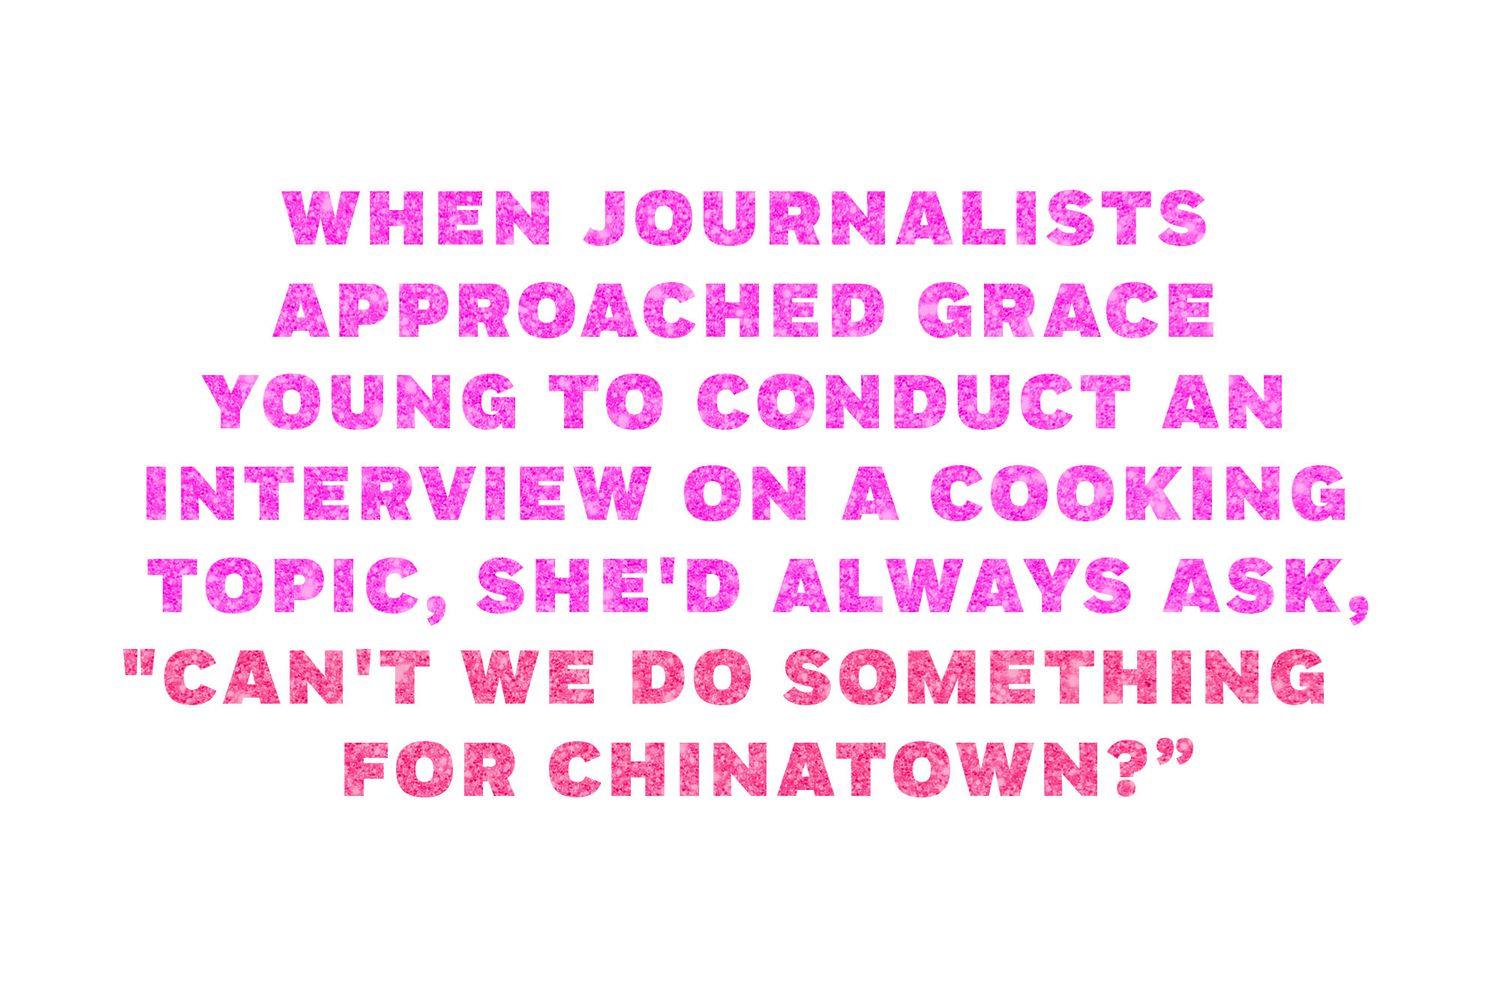 When journalists approached Grace Young to conduct an interview on a cooking topic, she'd always ask, "Can't we do something for Chinatown?"